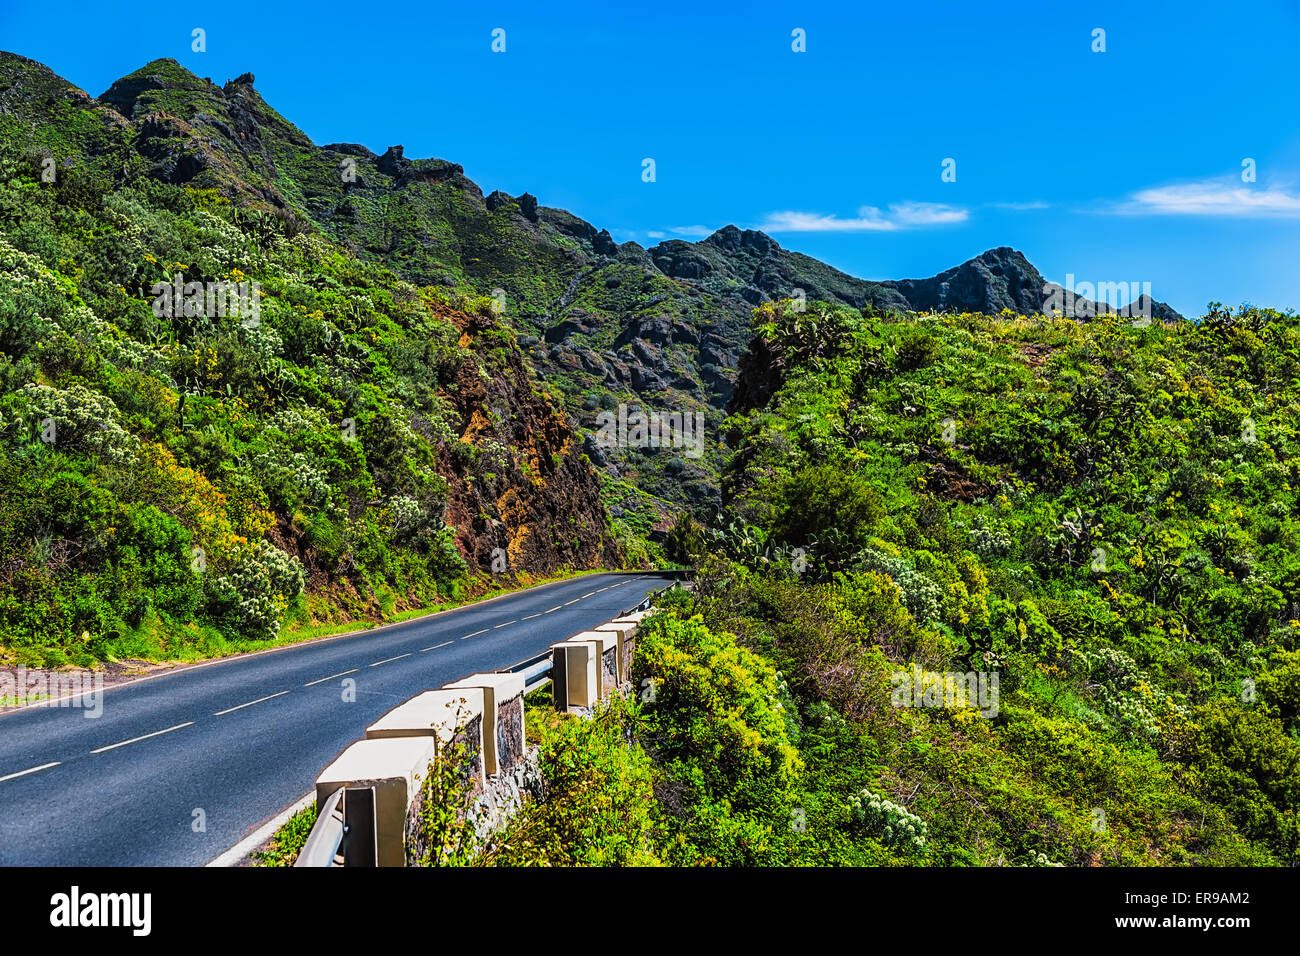 Asphalt road in green mountains or rocks with blue sky and clouds in Tenerife Canary island, Spain at spring or summer Stock Photo